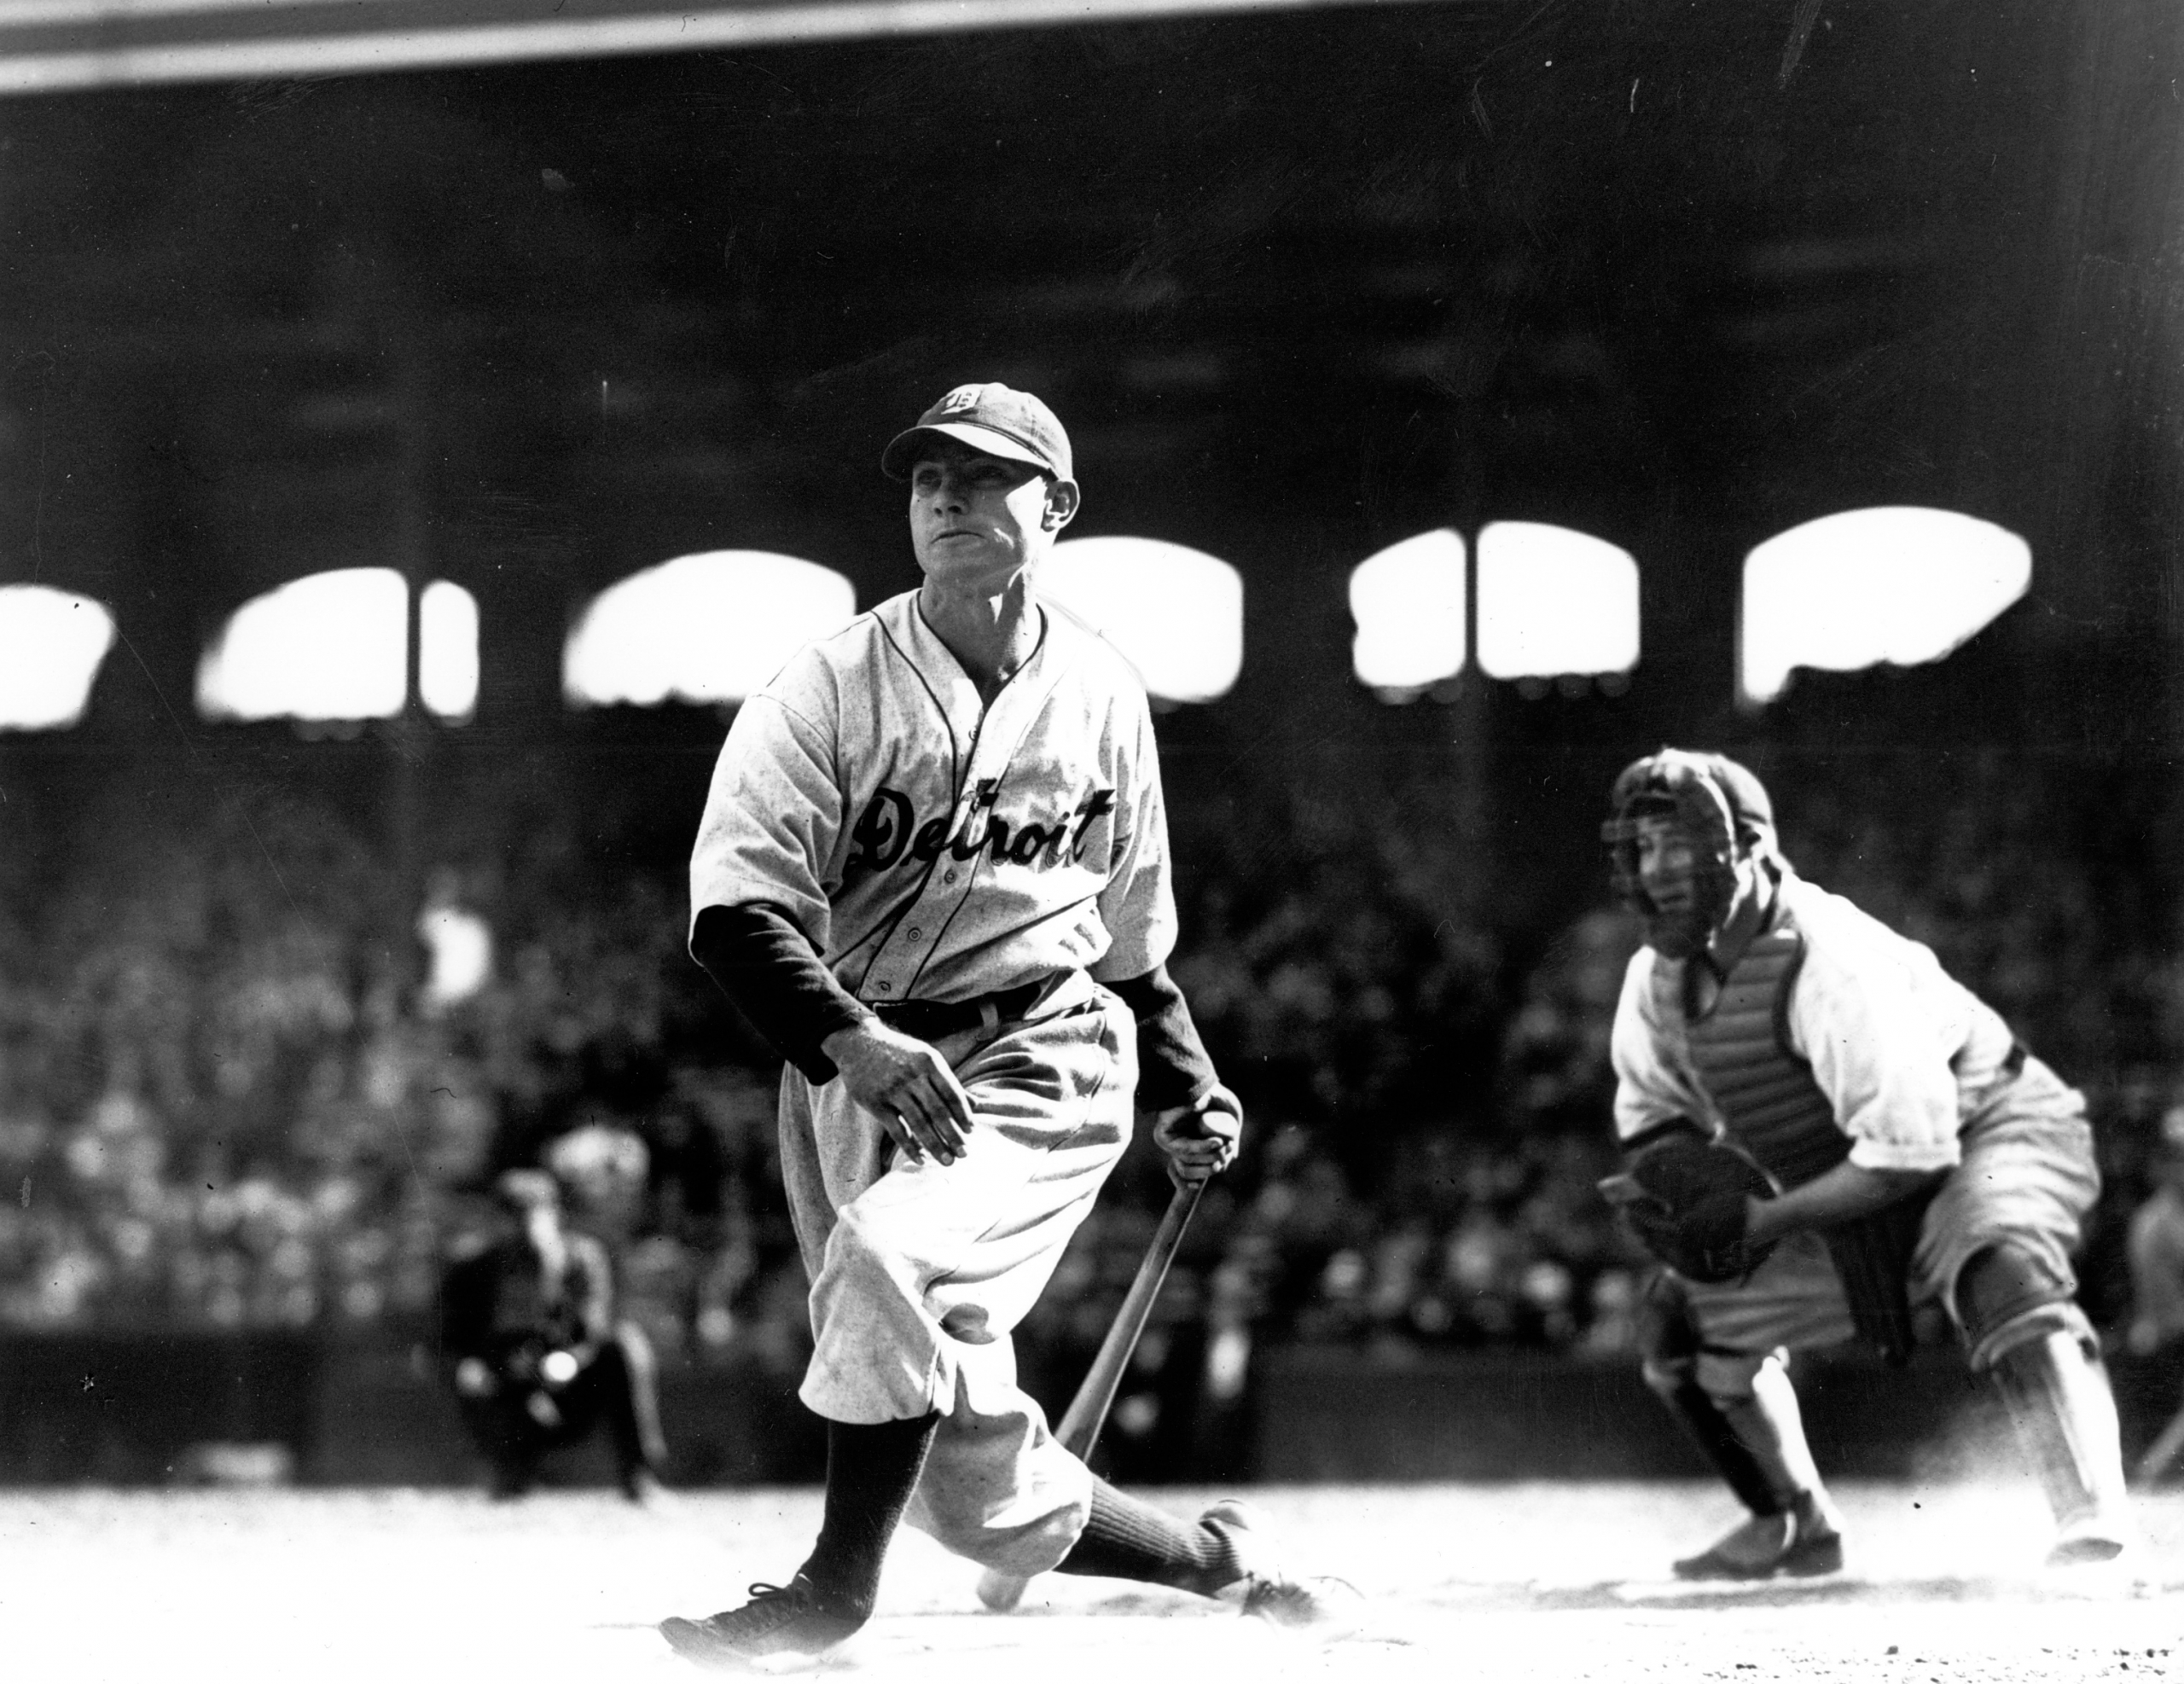 Outfielder hit for high averages, rarely walked or struck out. In 1936, he collected 55 doubles to rank second in the AL.